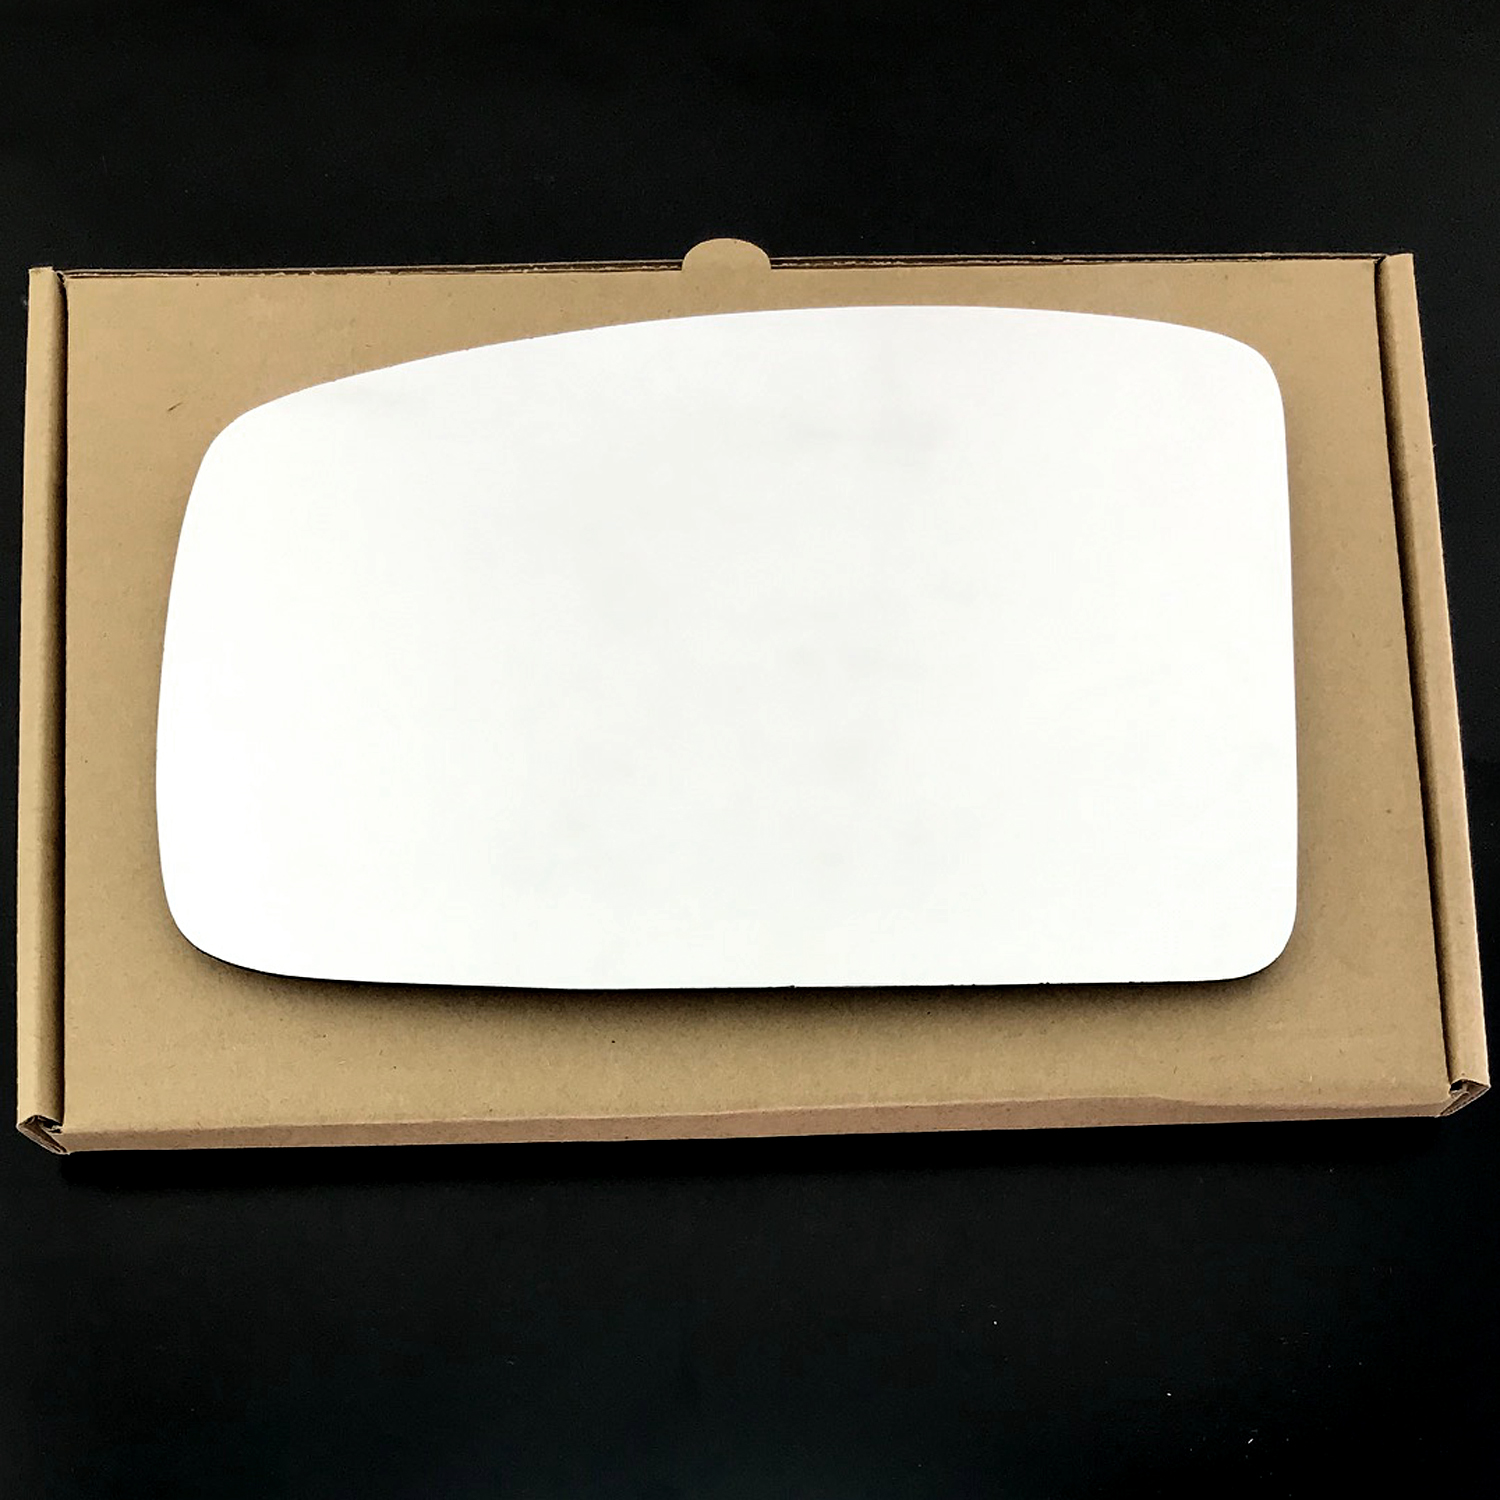 Nissan NV400 Wing Mirror Glass RIGHT HAND ( UK Driver Side ) 2011 to 2019 – Convex Wing Mirror